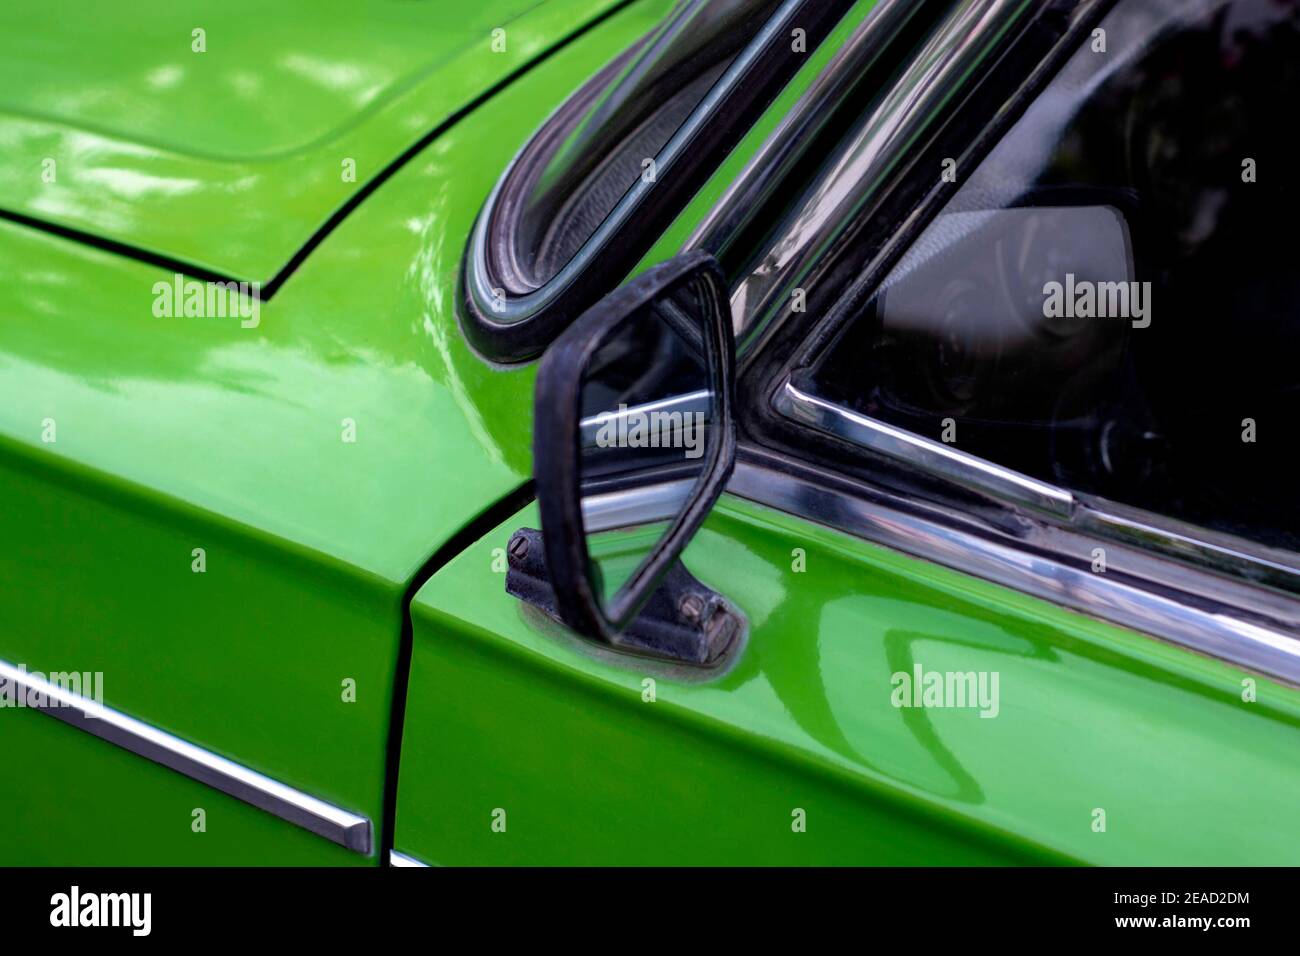 Outdoor mirror of old Soviet car. Side view. View from the front. The body is green. Kurskoe, Crimea - 4 October, 2020 Stock Photo